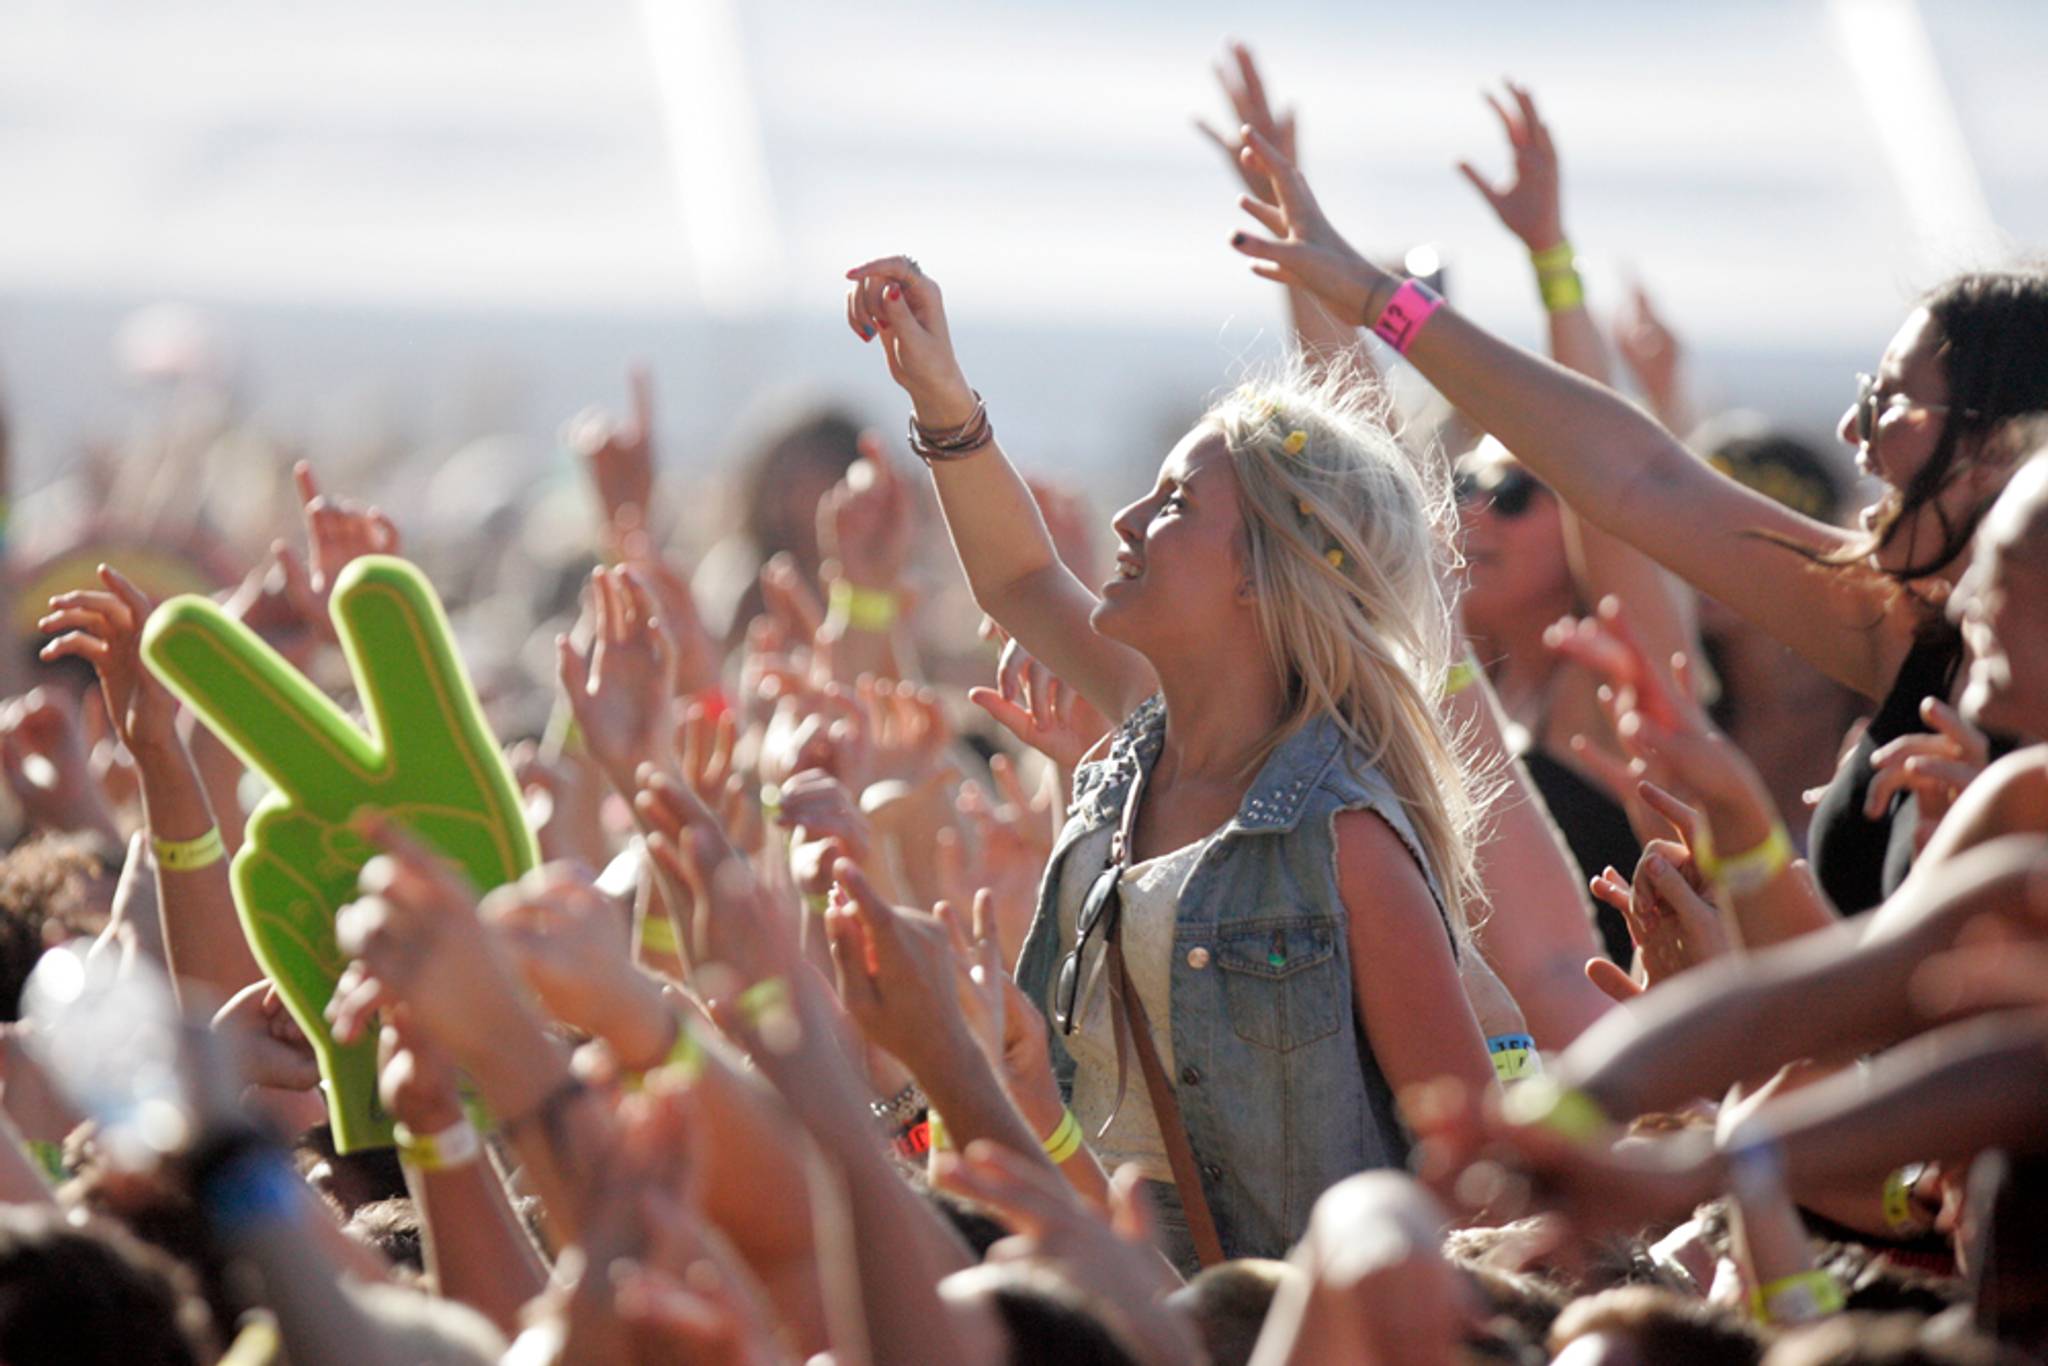 British festivalgoers test their pills for safety